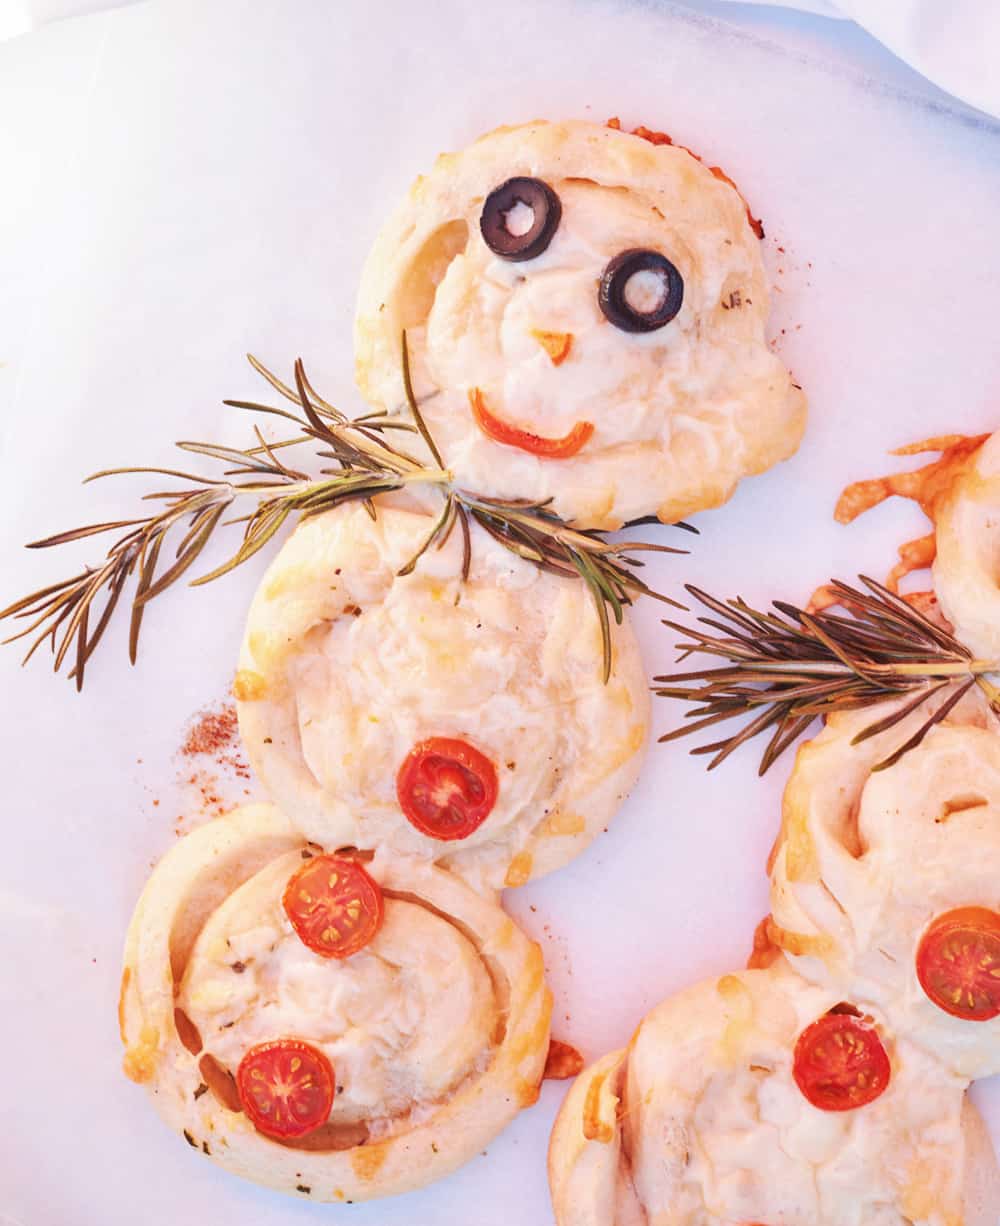 How To Make Savory Mini Snowman Pizzas For the Holidays